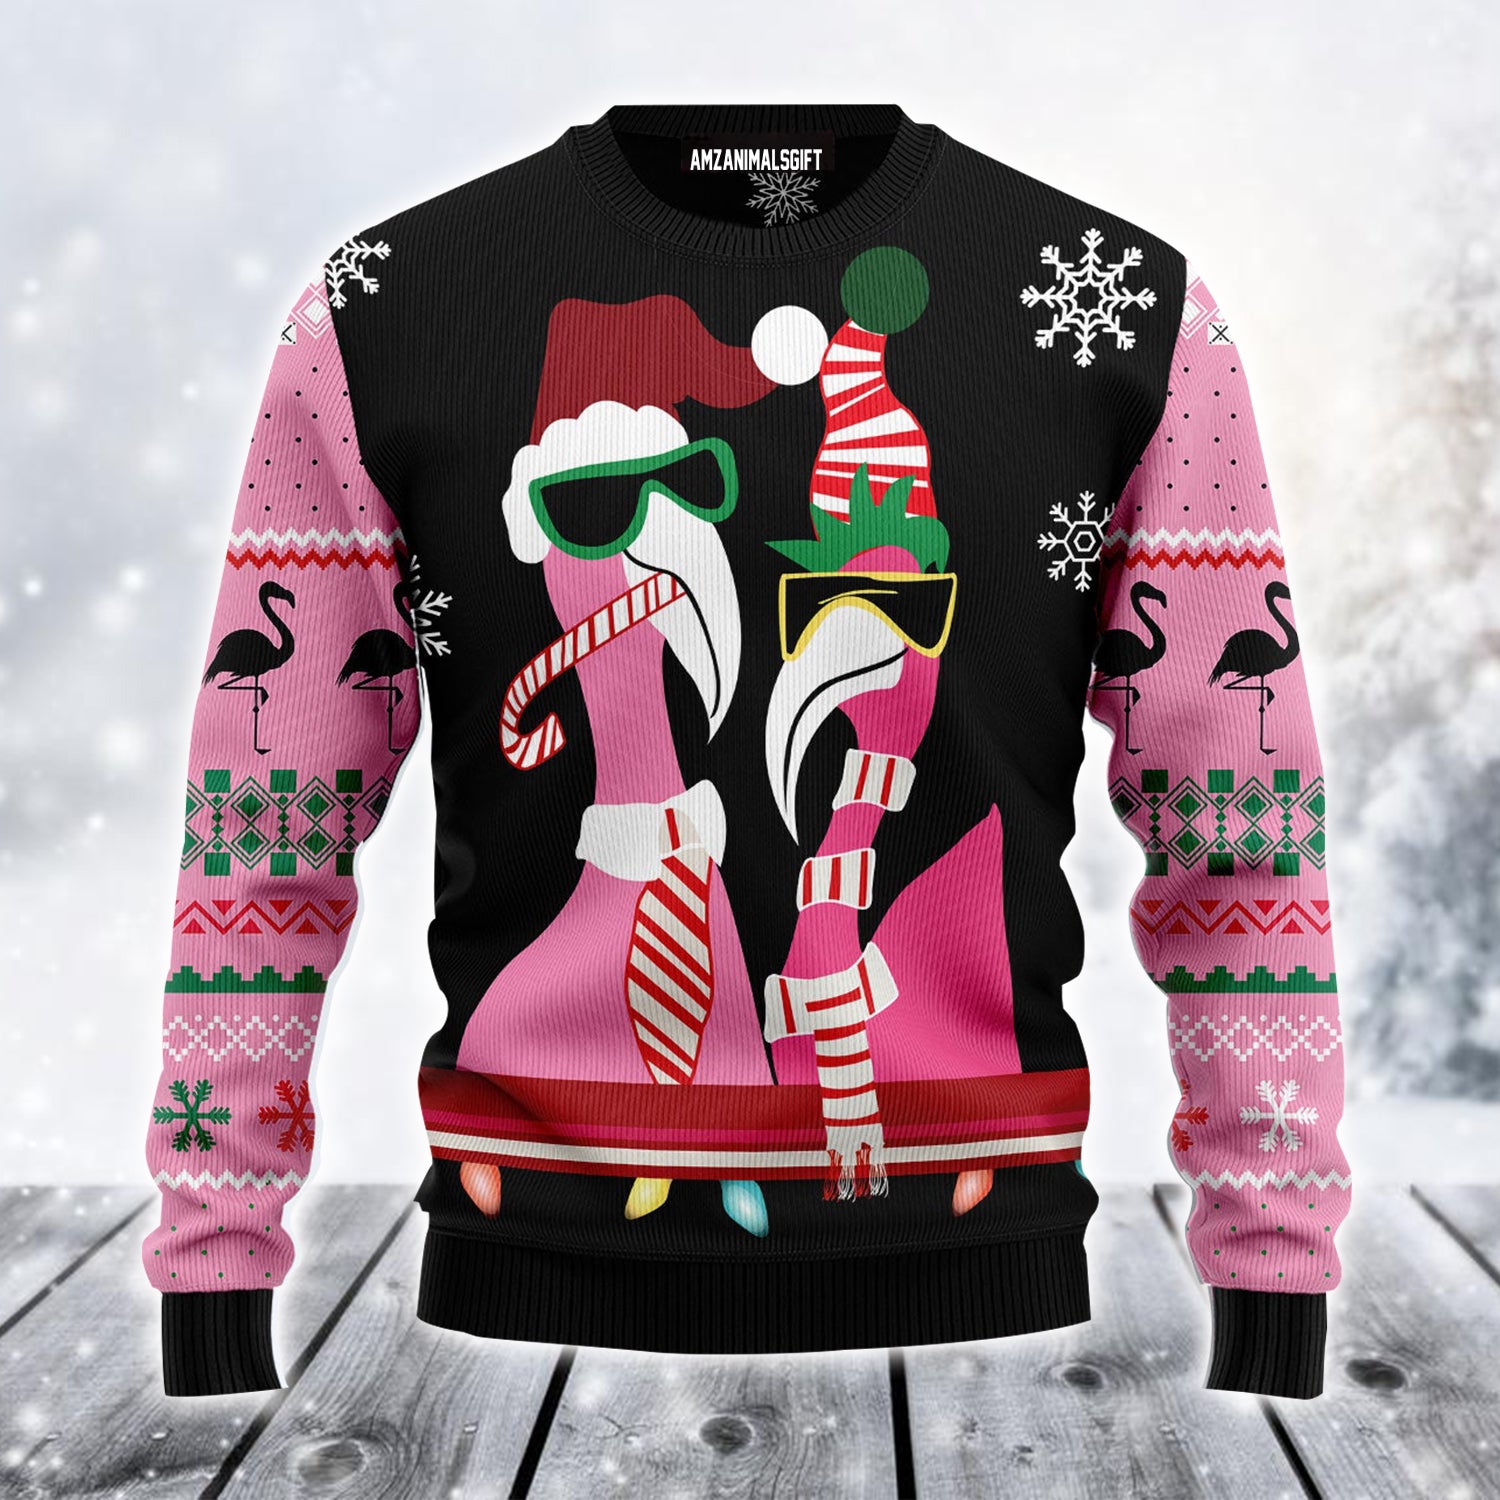 Candy Cane Flamingo Ugly Christmas Sweater, Funny Couple Flamingo Ugly Sweater For Men & Women - Perfect Gift For Christmas, Friends, Family